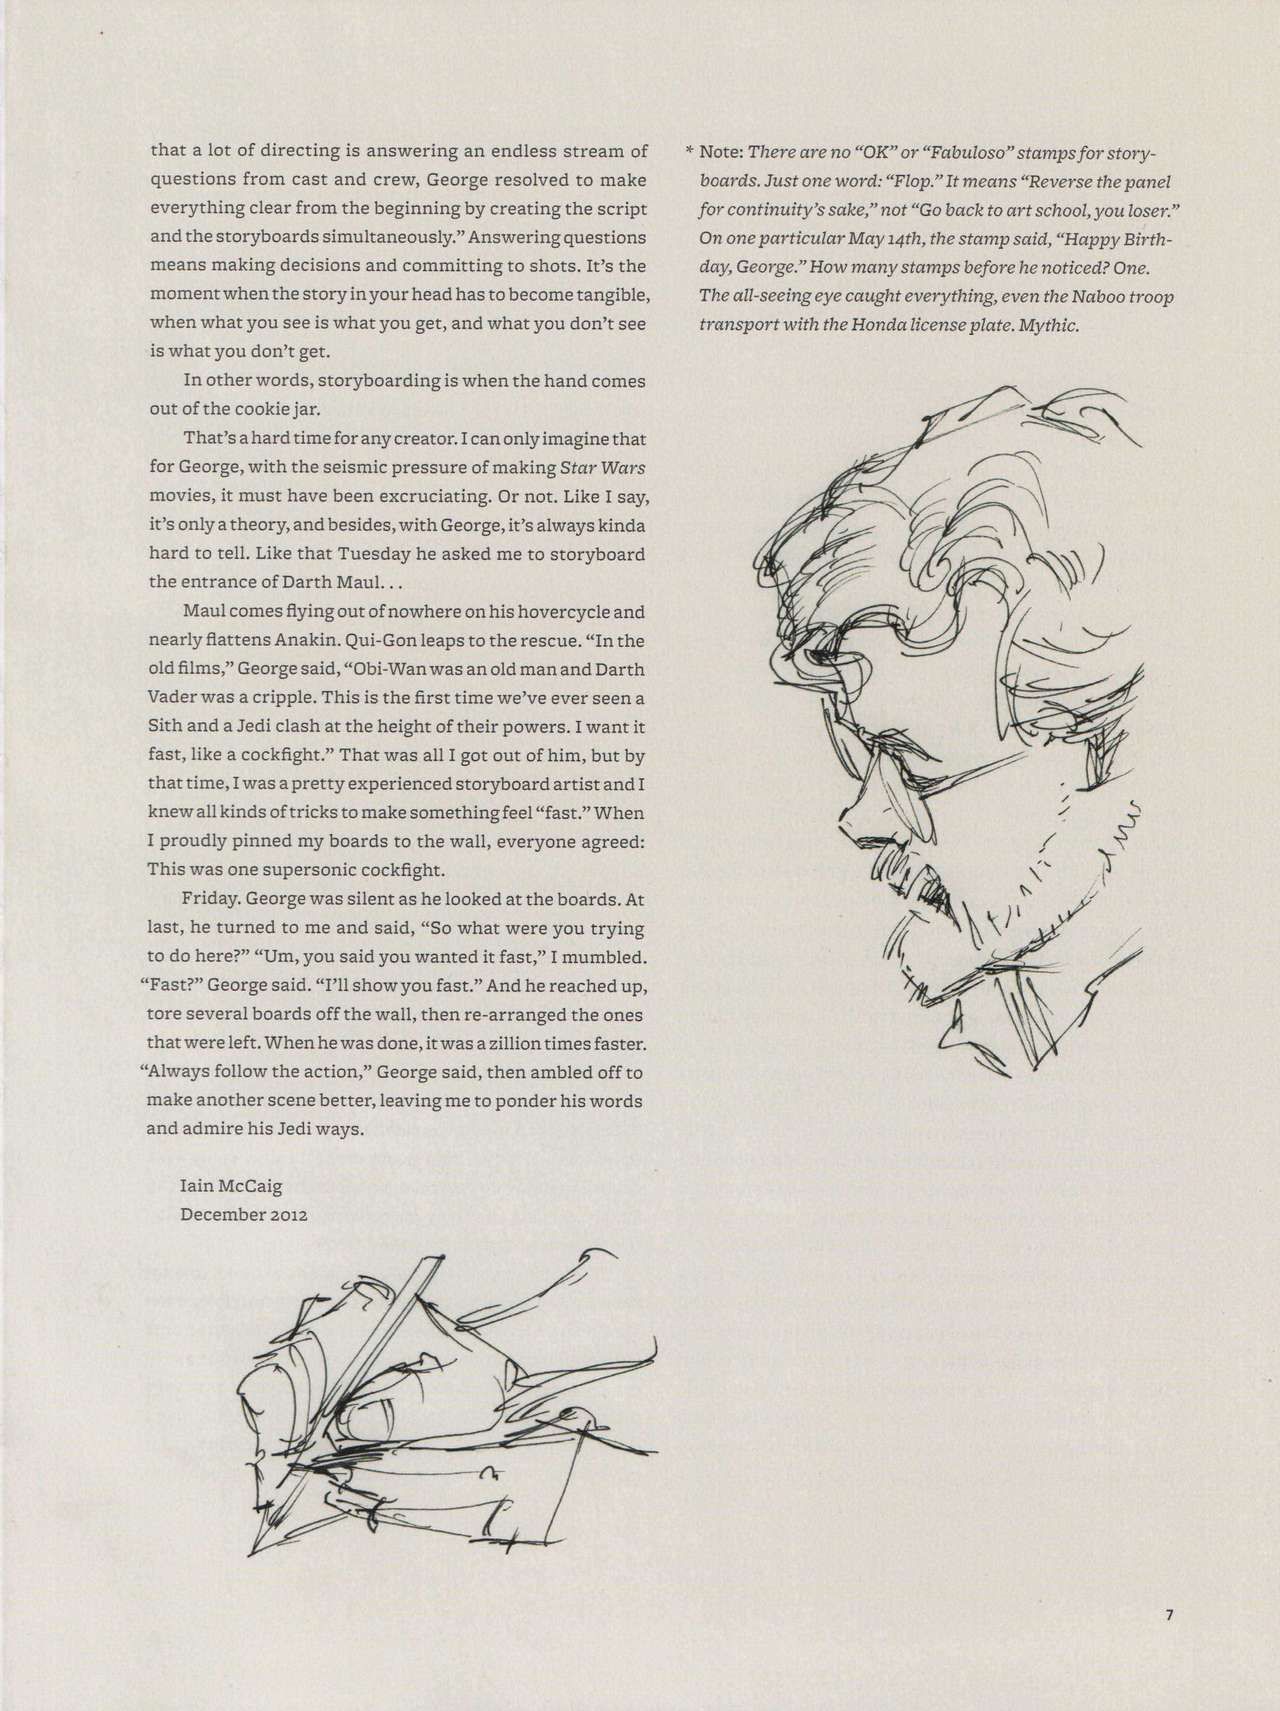 Star Wars Storyboards - The Prequel Trilogy 11